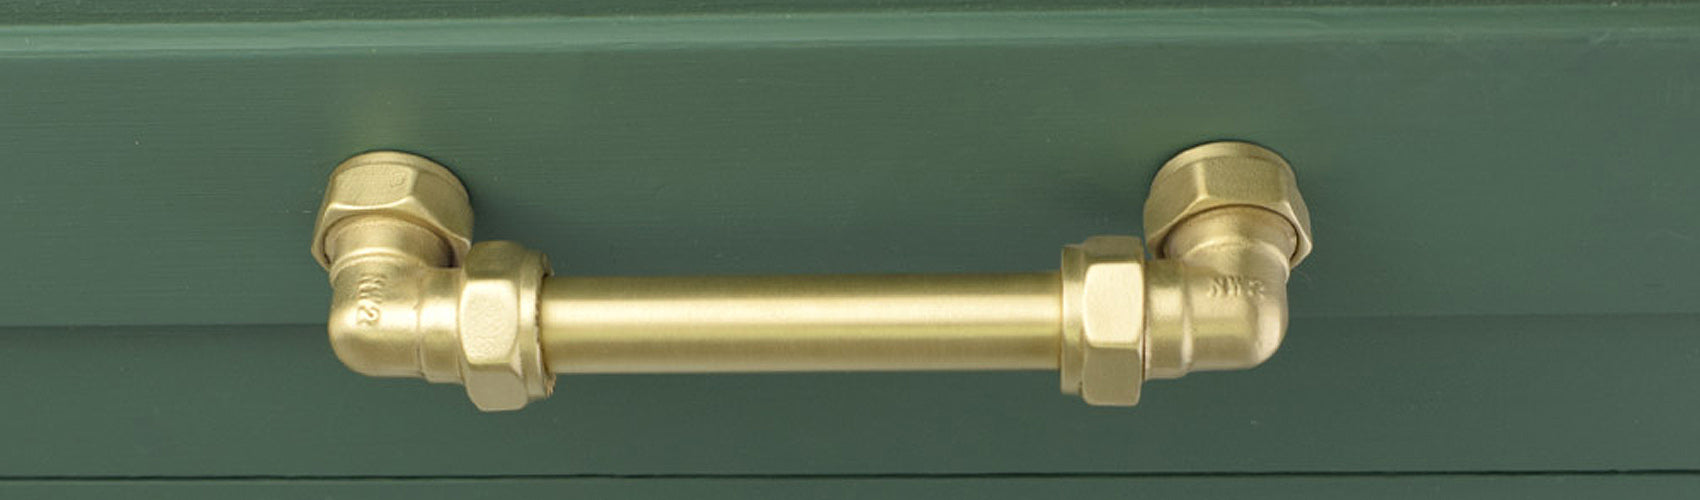 brass industrial kitchen pull handles and knobs now available in our new kitchen shop or online shop